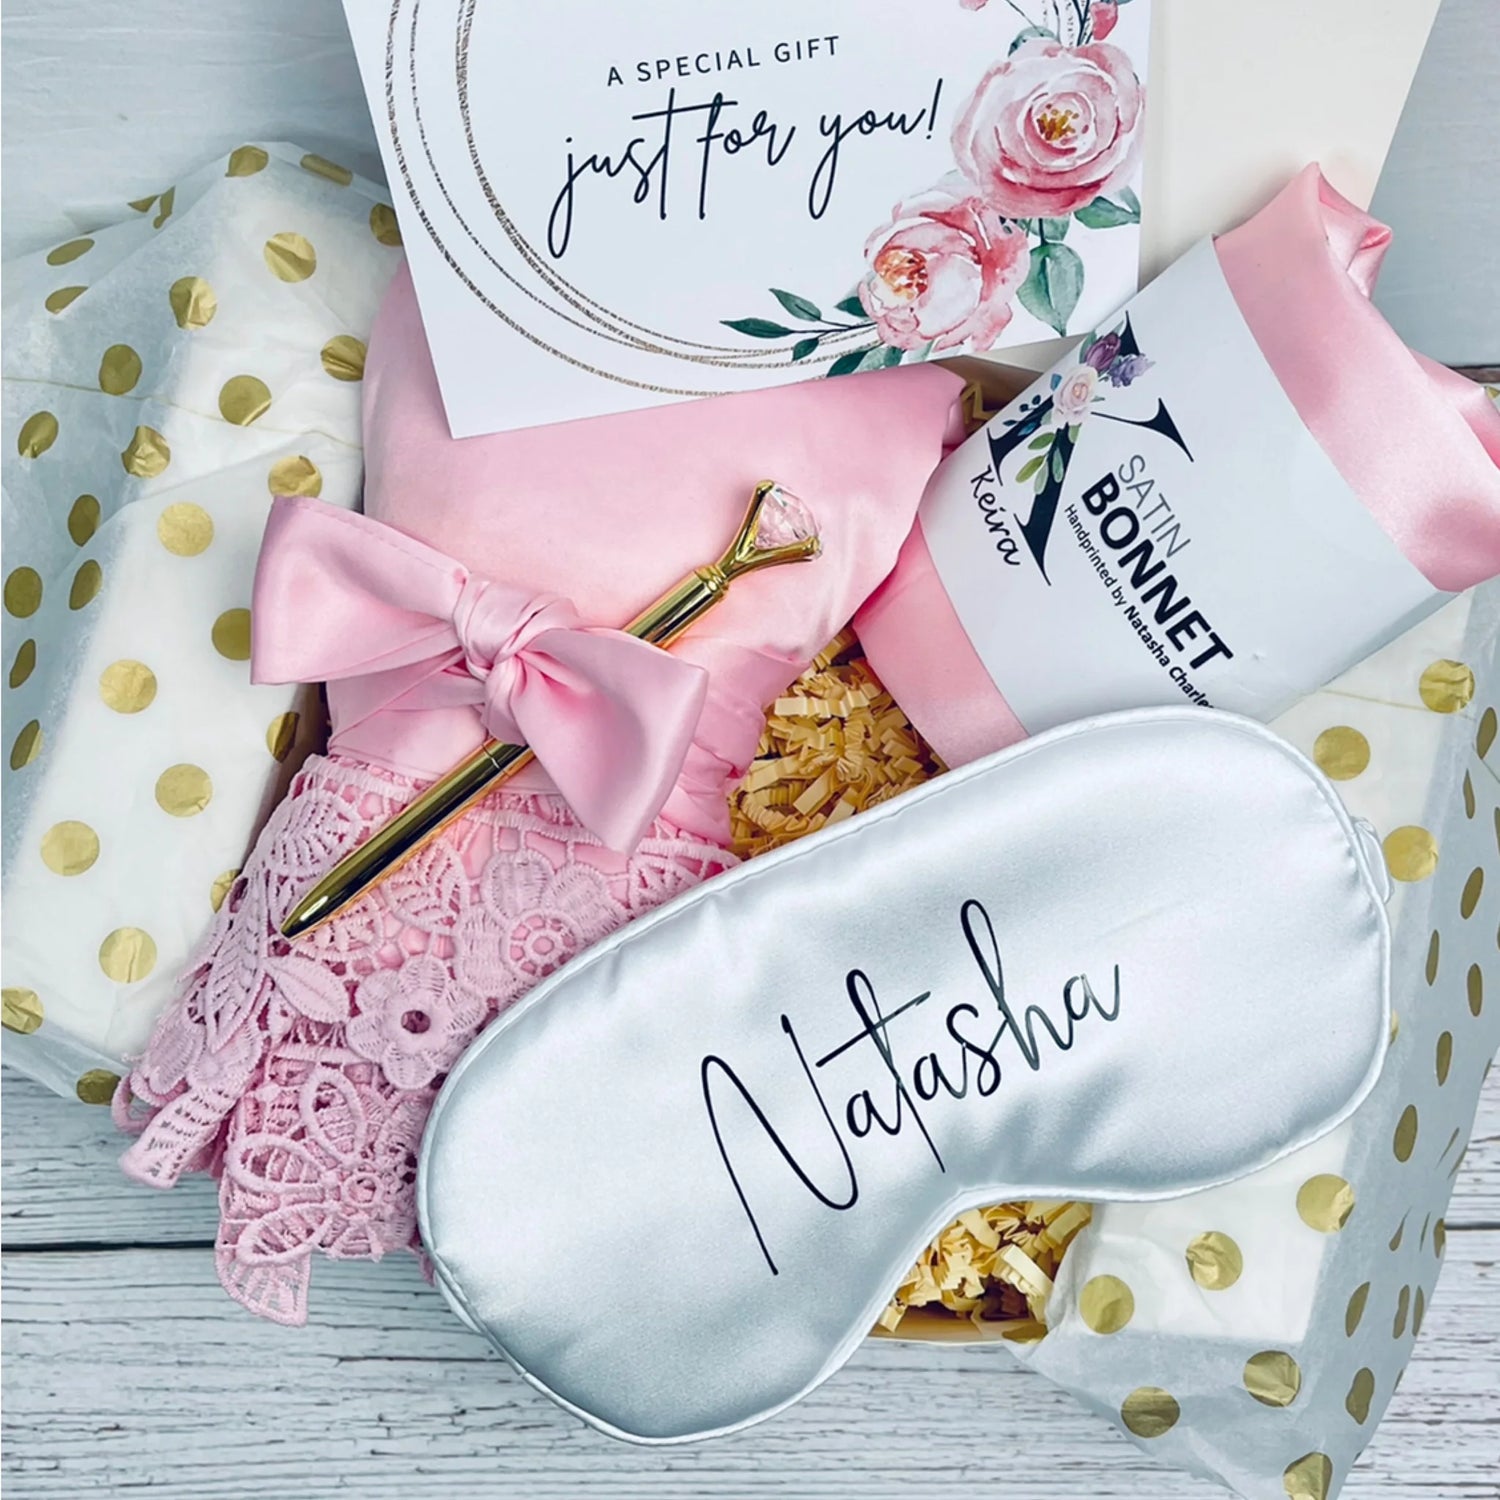 PERSONALISED GIFTS